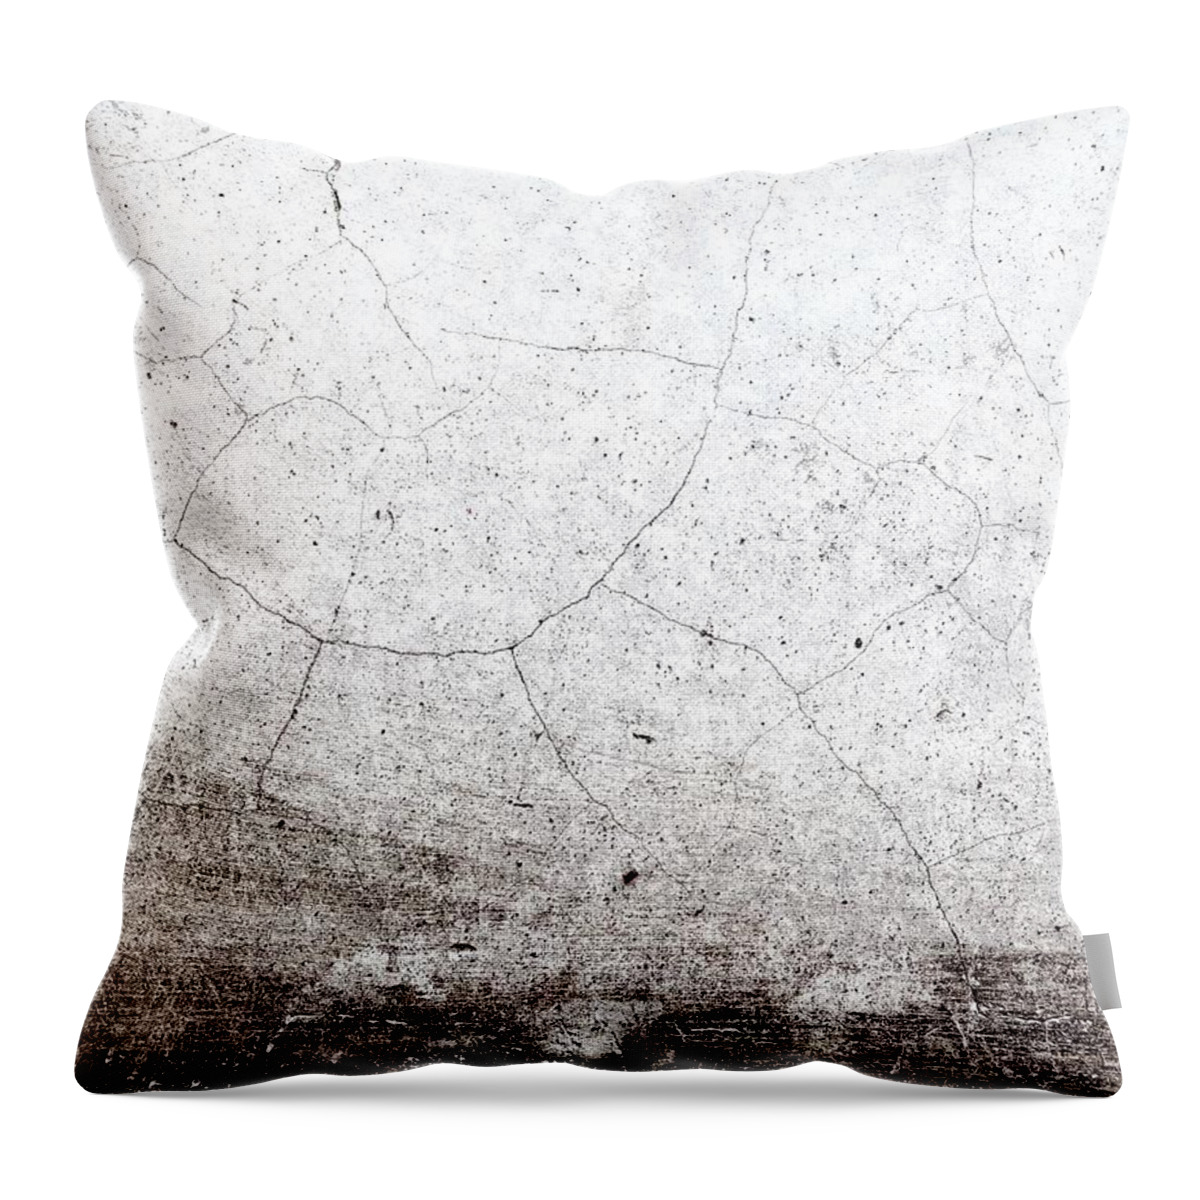 Architecture Throw Pillow featuring the photograph Cracked Wall by Eena Bo